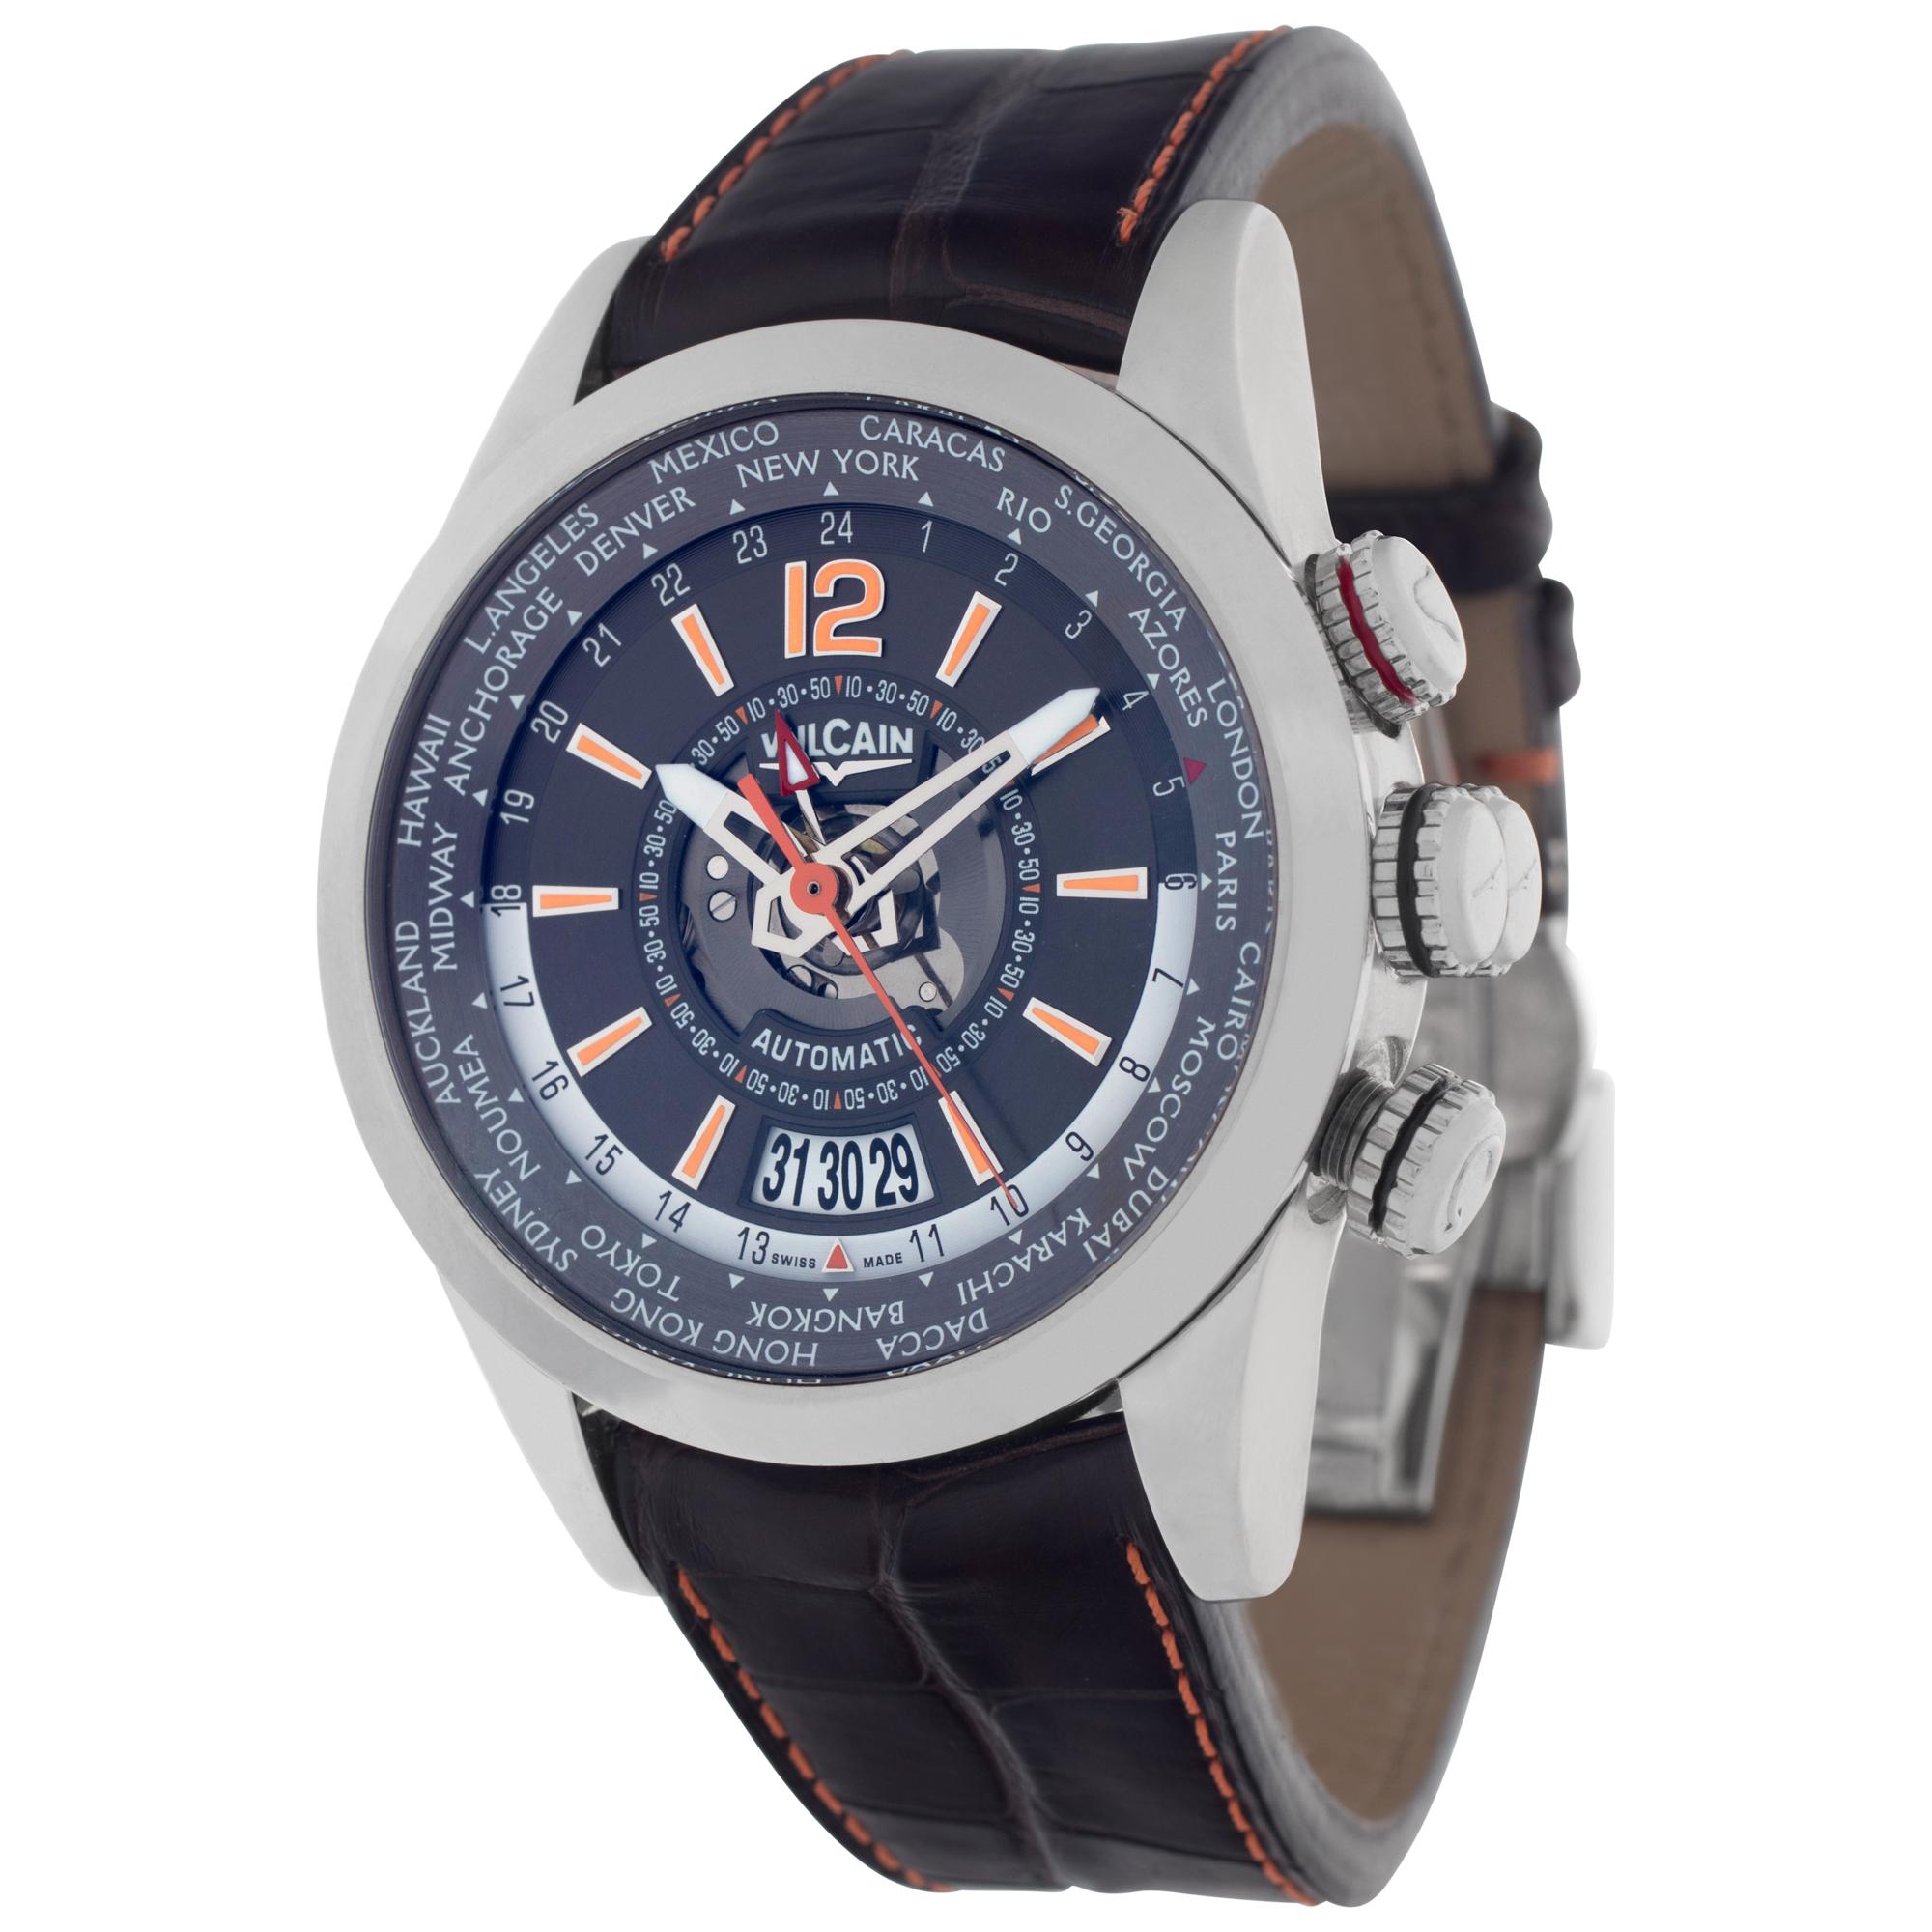 Vulcain Revolution GMT Men's World Time Automatic Alarm. Auto with alarm, world time, date. Box, papers and manual. Ref 210129.193. Circa 2011. Fine Pre-owned Vulcain Watch.

Certified preowned Sport Vulcain World Time 210129.193 watch is made out